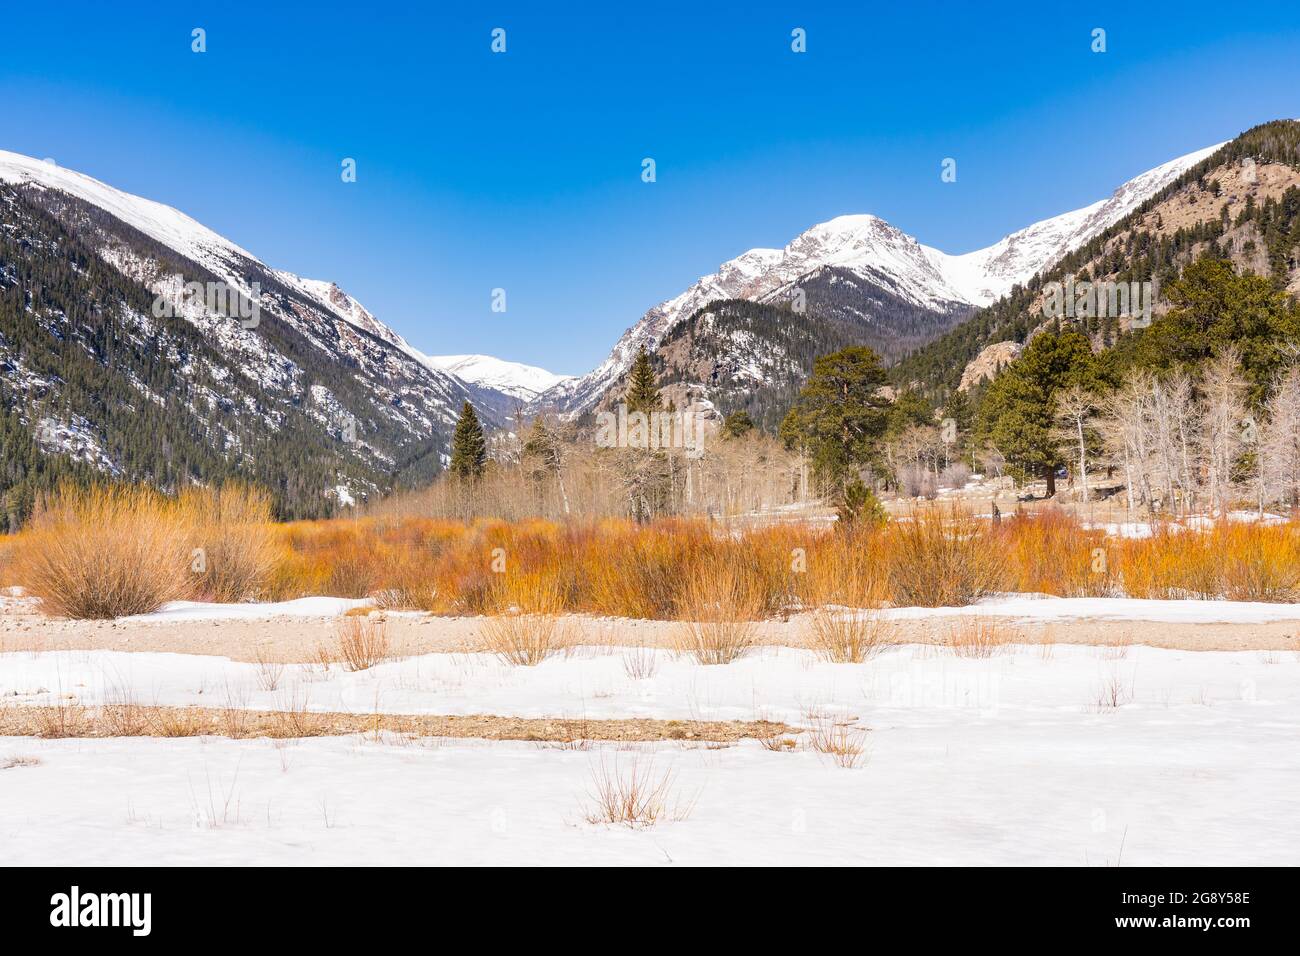 Snow covered winter mountains in Rocky Mountain National Park, Colorado Stock Photo